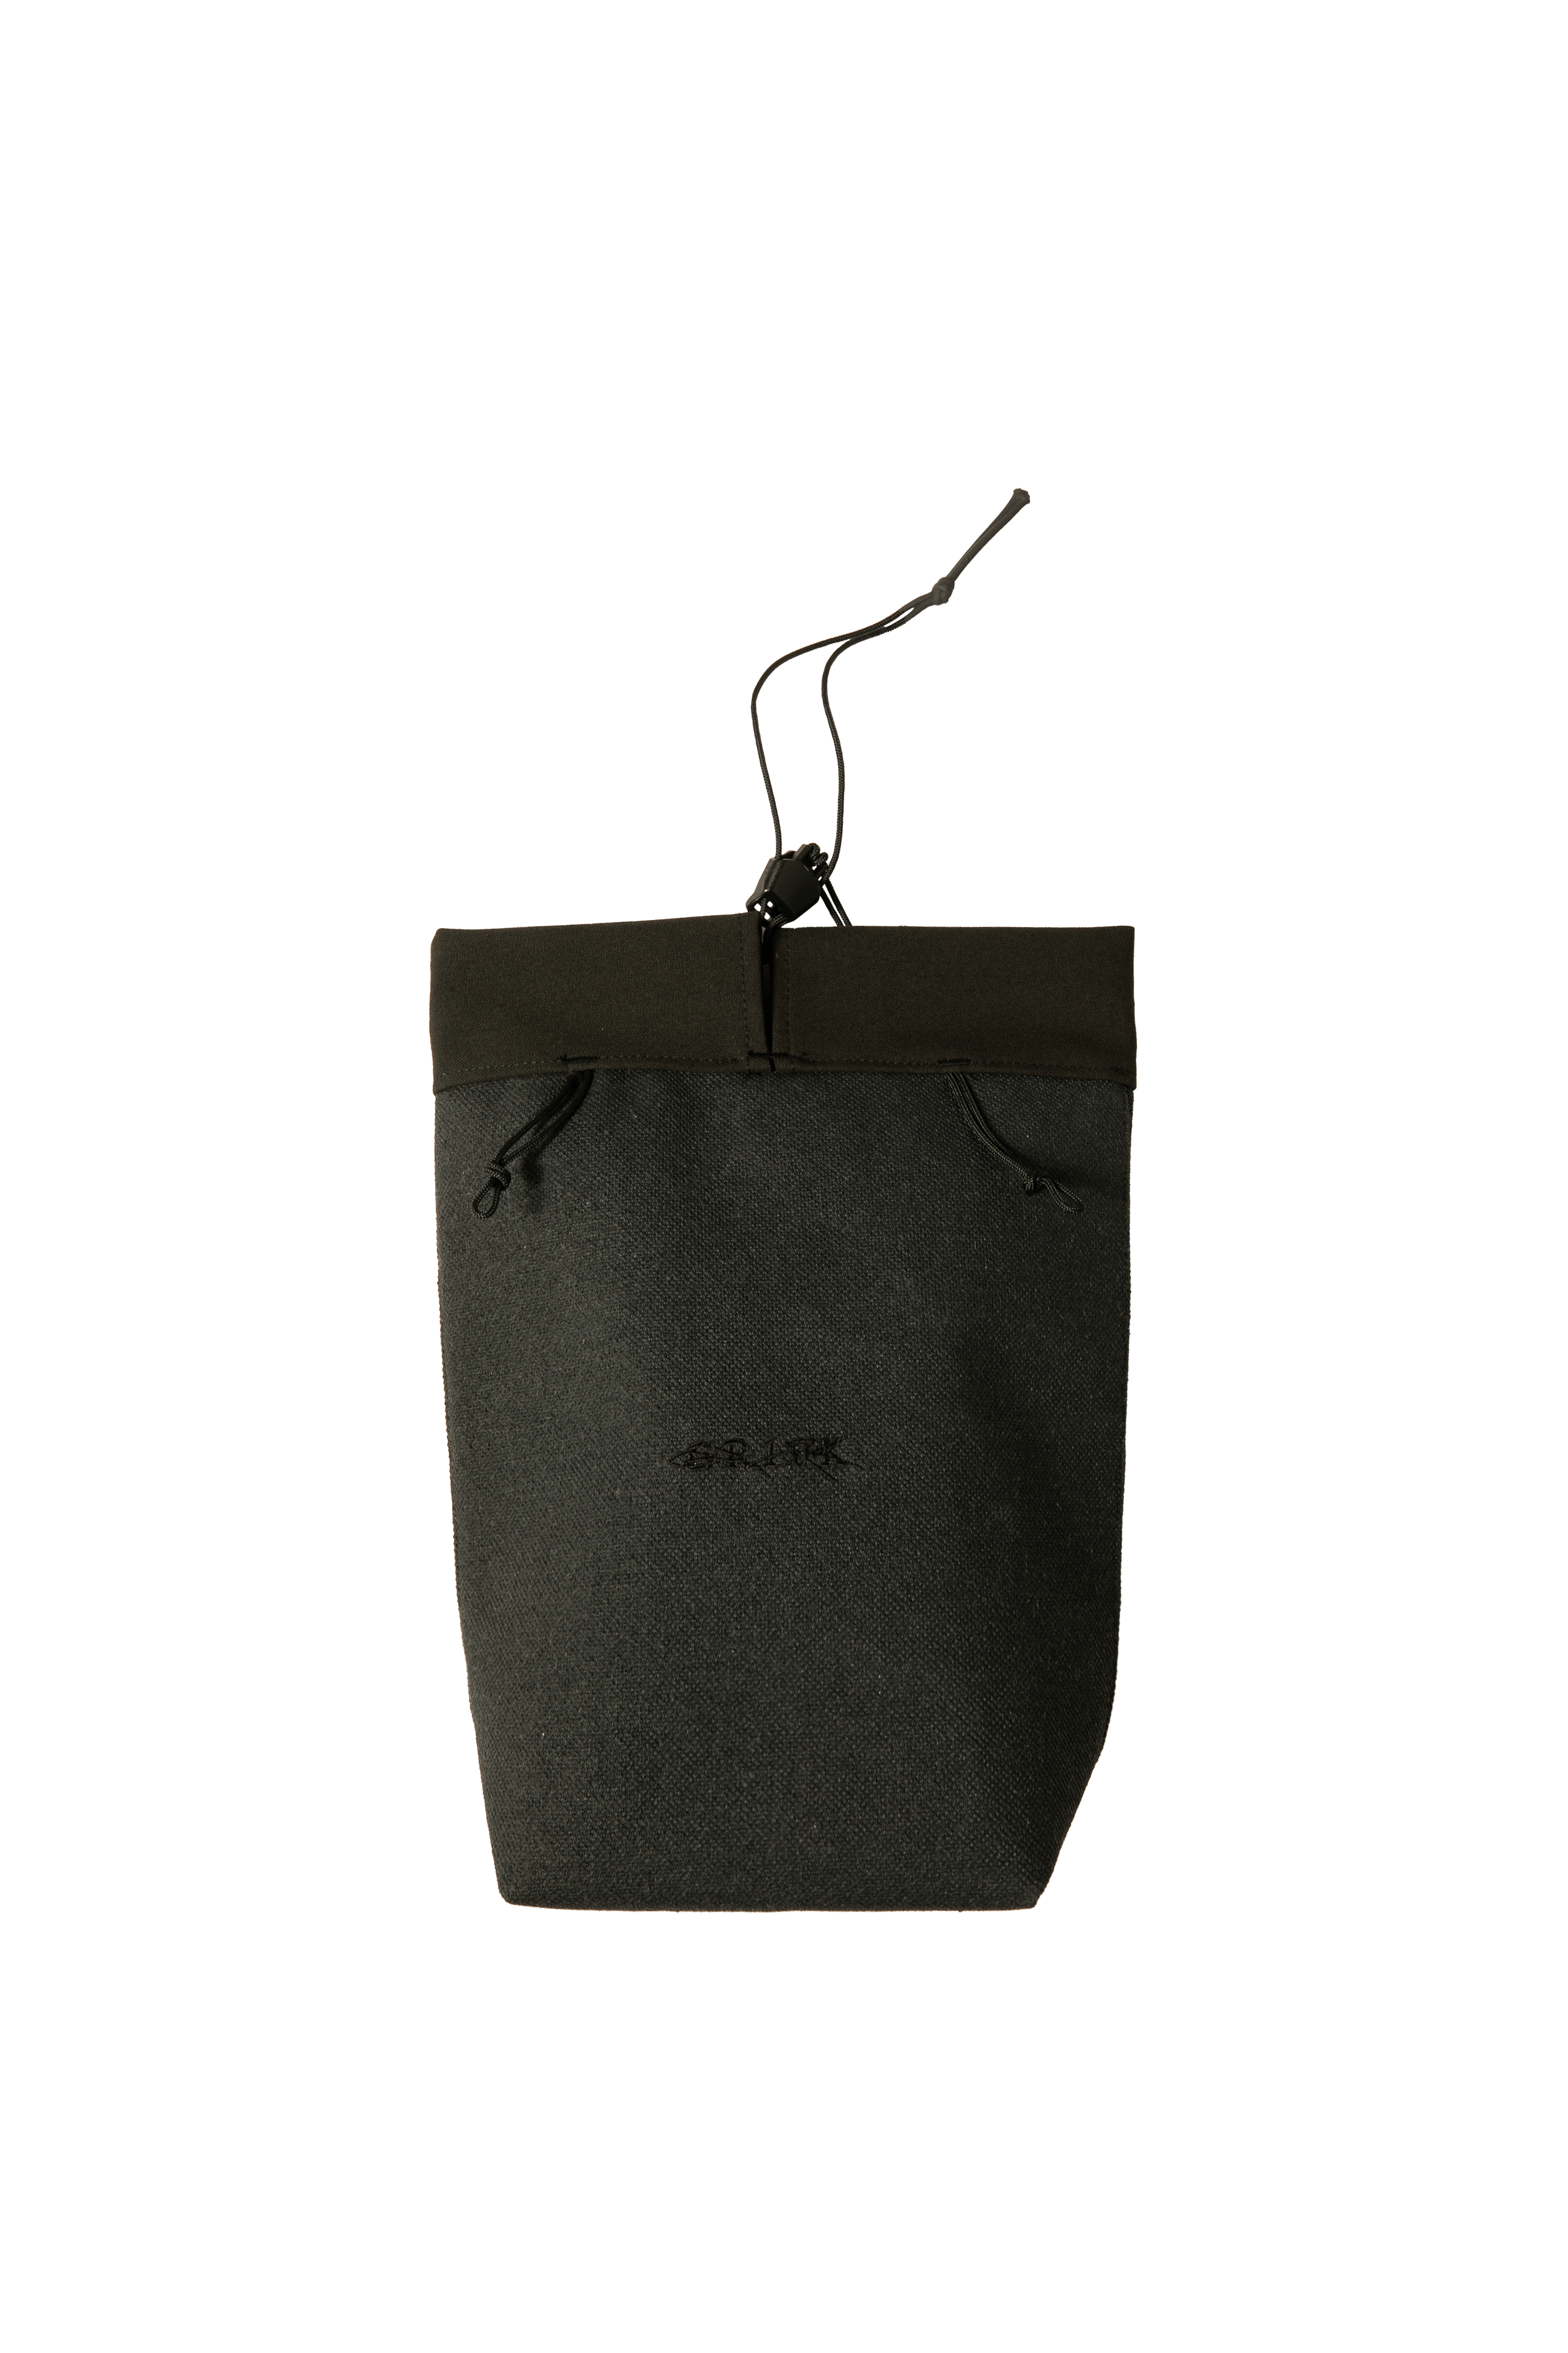 Europrotect Pouch